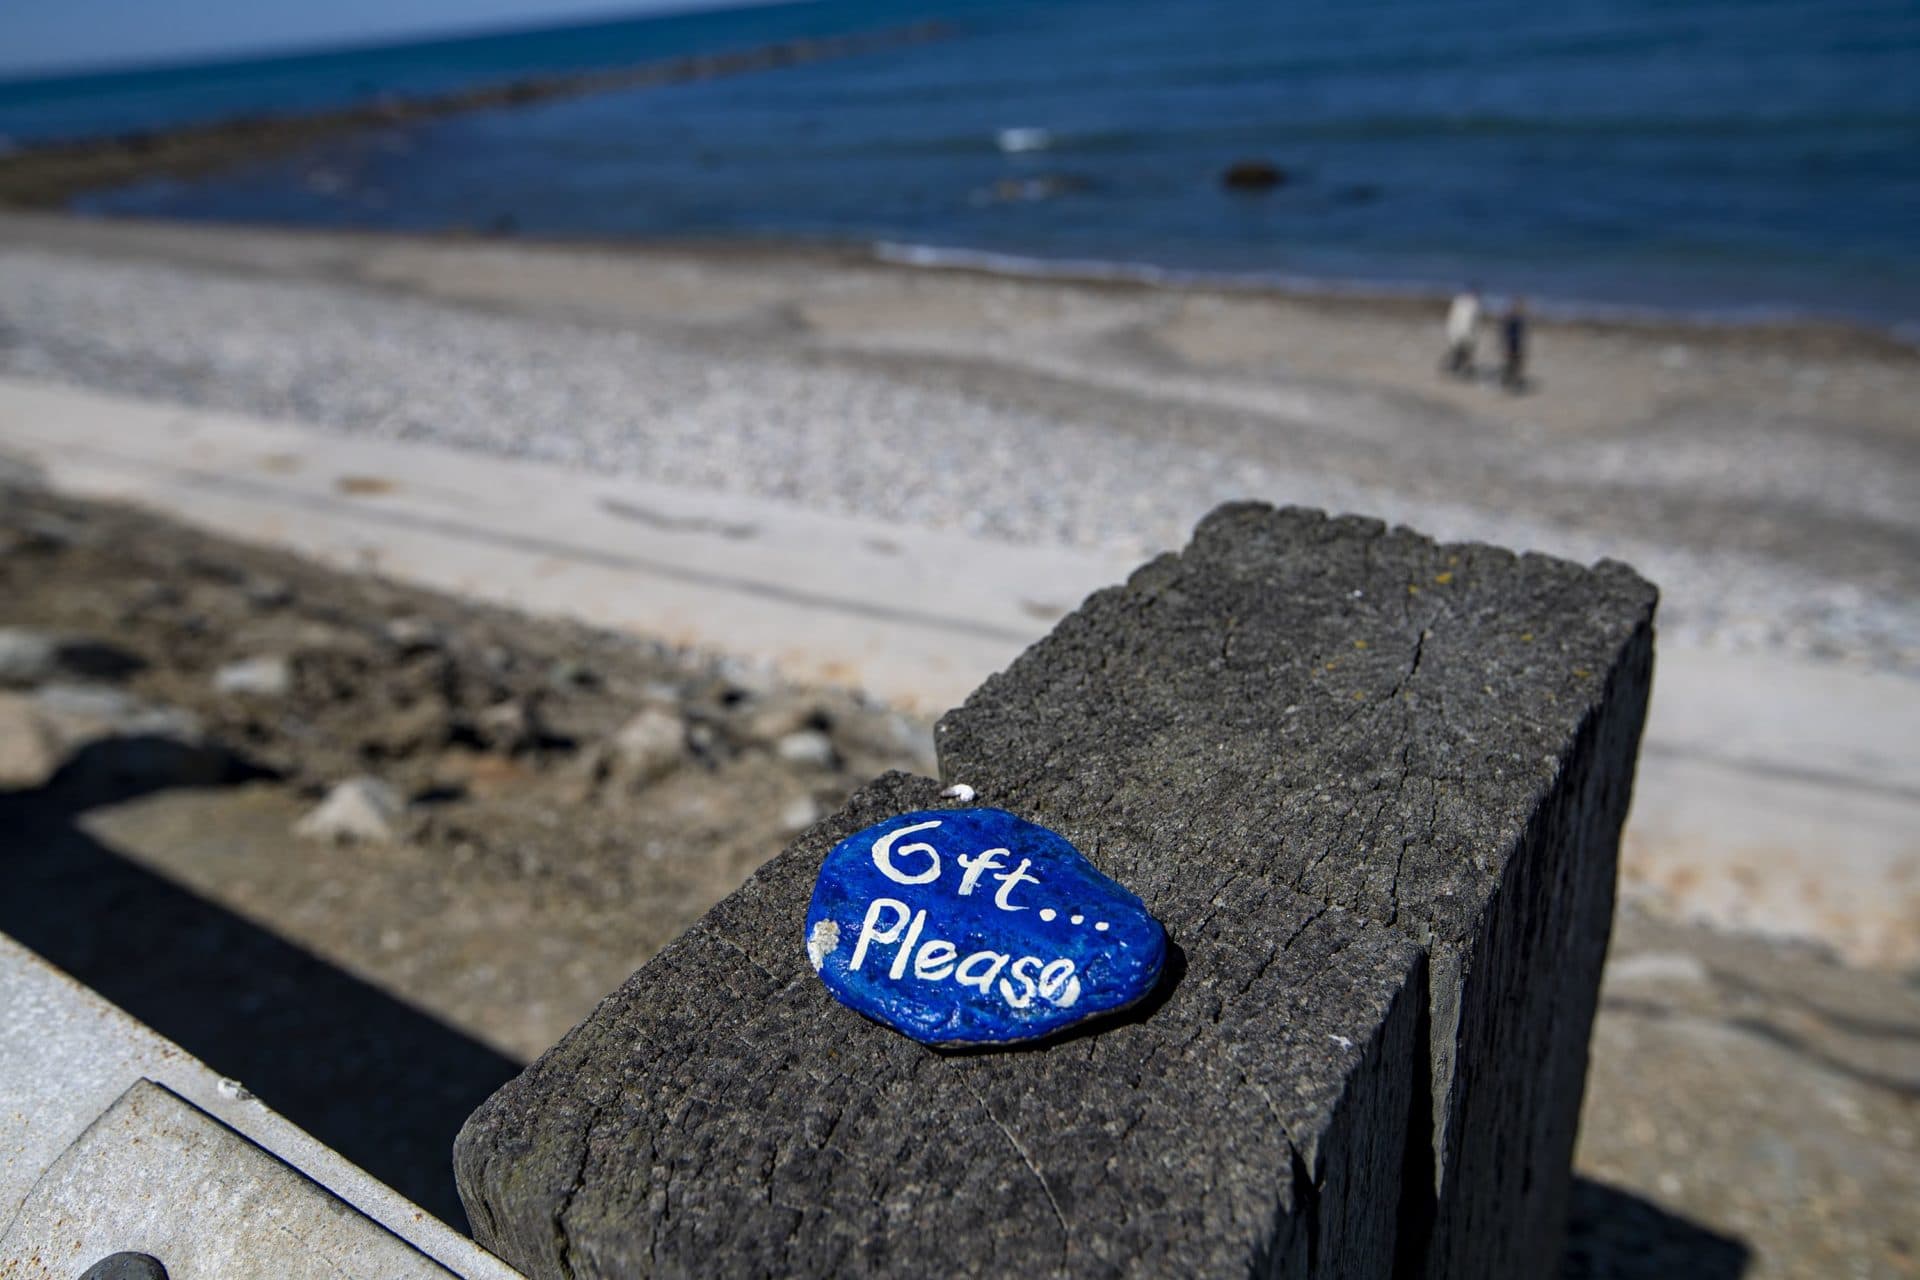 May 20: Brightly painted rocks with messages inscribed on them regarding the coronavirus pandemic are left on top of the guardrails at a virtually empty Brant Rock Beach in Marshfield. (Jesse Costa/WBUR)